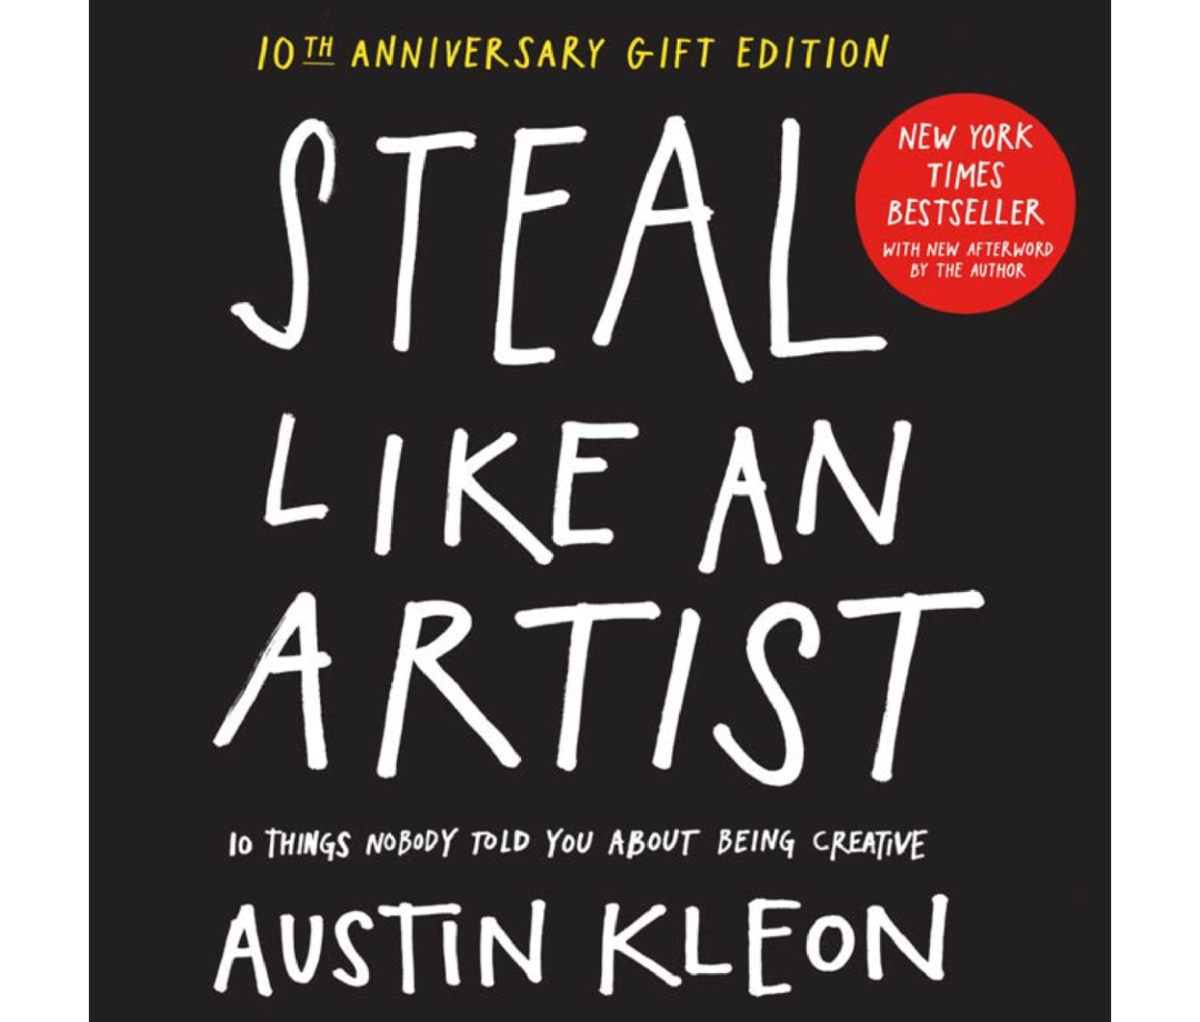 Steal Like an Artist 10th Anniversary Gift Edition by Austin Kleon